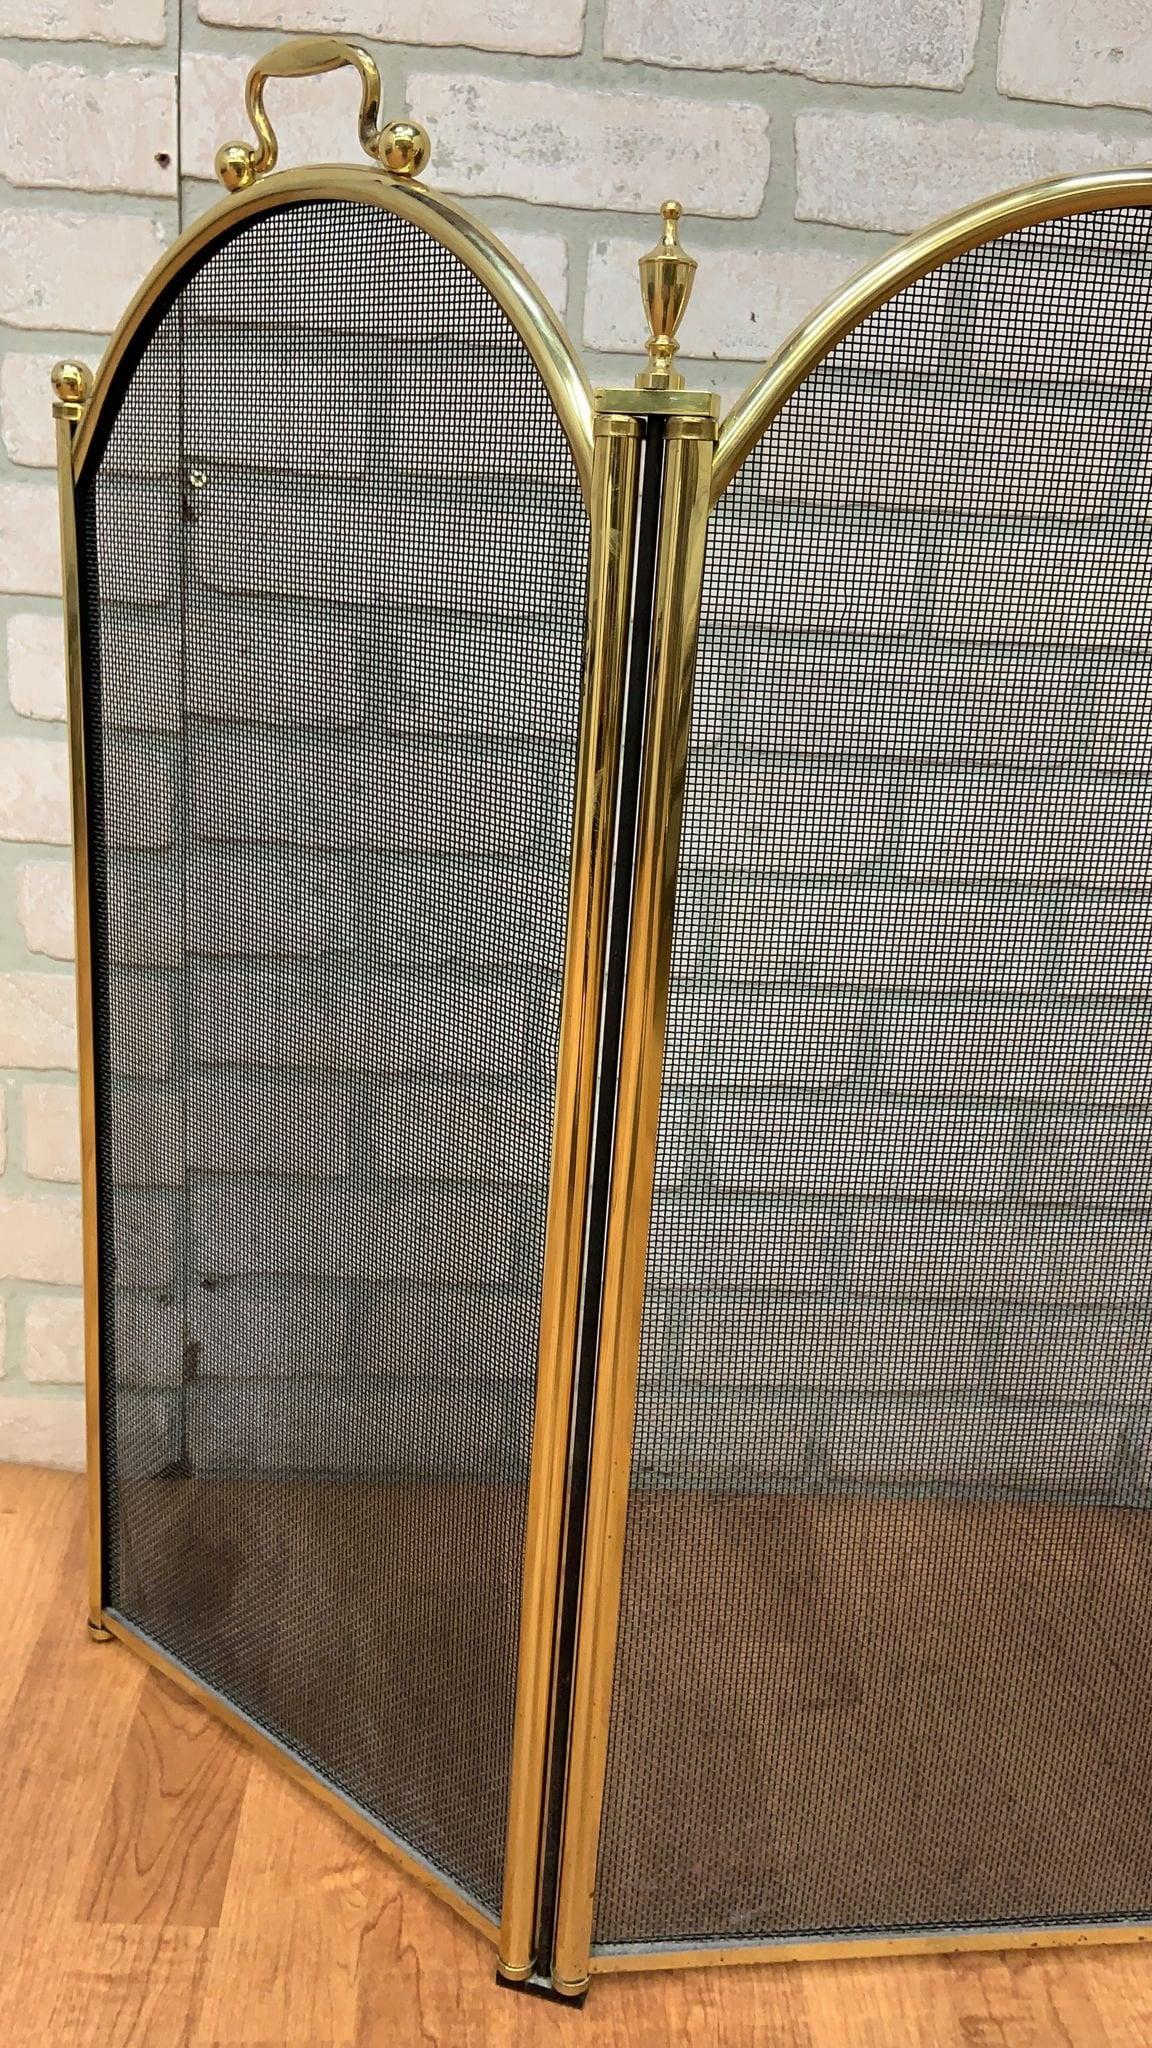 Vintage Mid Century Mesh with Brass Ball Handles & Finials Folding Hearth Screen In Good Condition For Sale In Chicago, IL